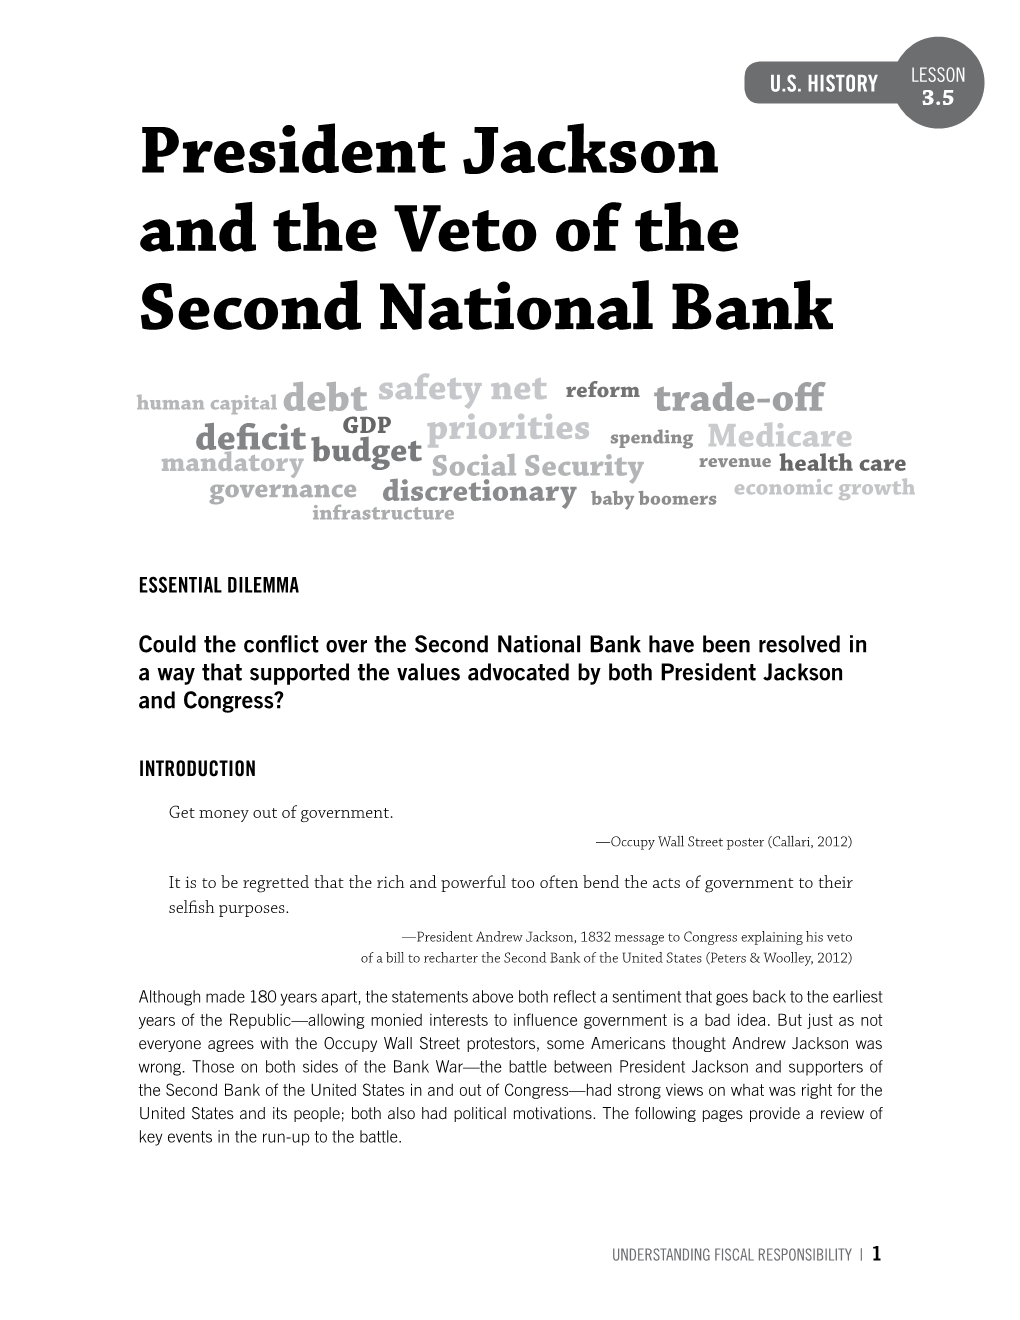 President Jackson and the Veto of the Second National Bank